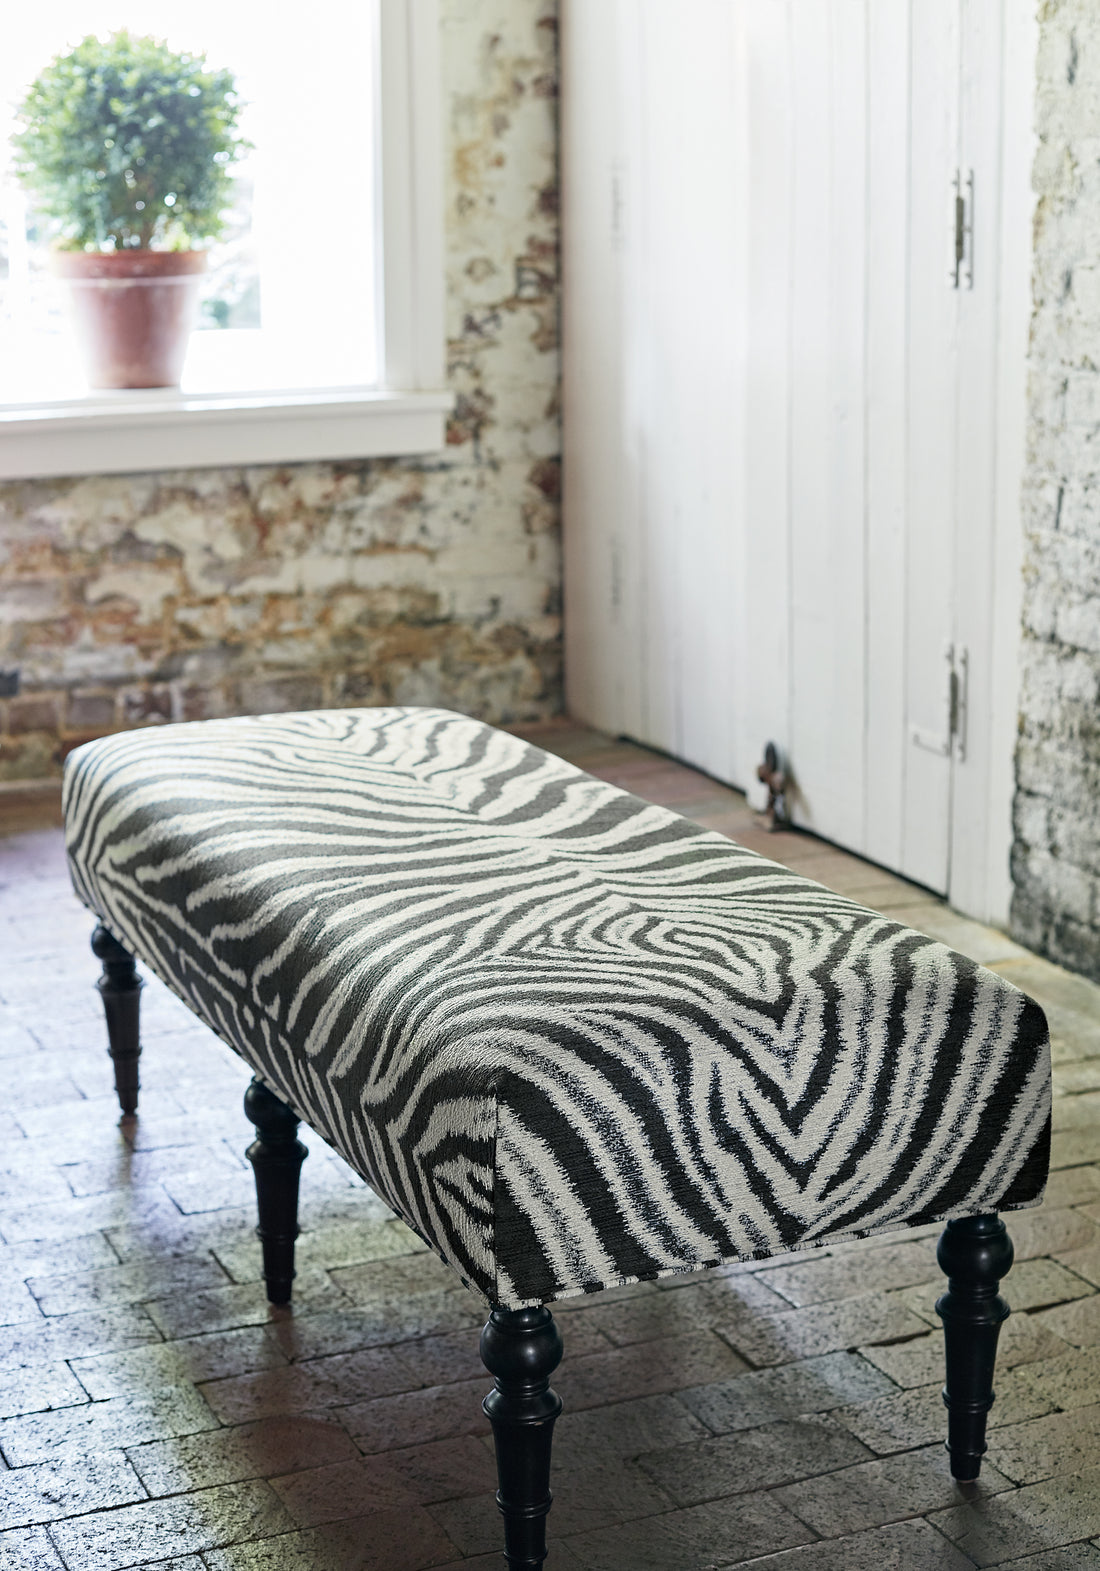 Baxter Ottoman in Zamira woven fabric in black color - pattern number W80438 - by Thibaut in the Woven Resource Vol 10 Menagerie collection